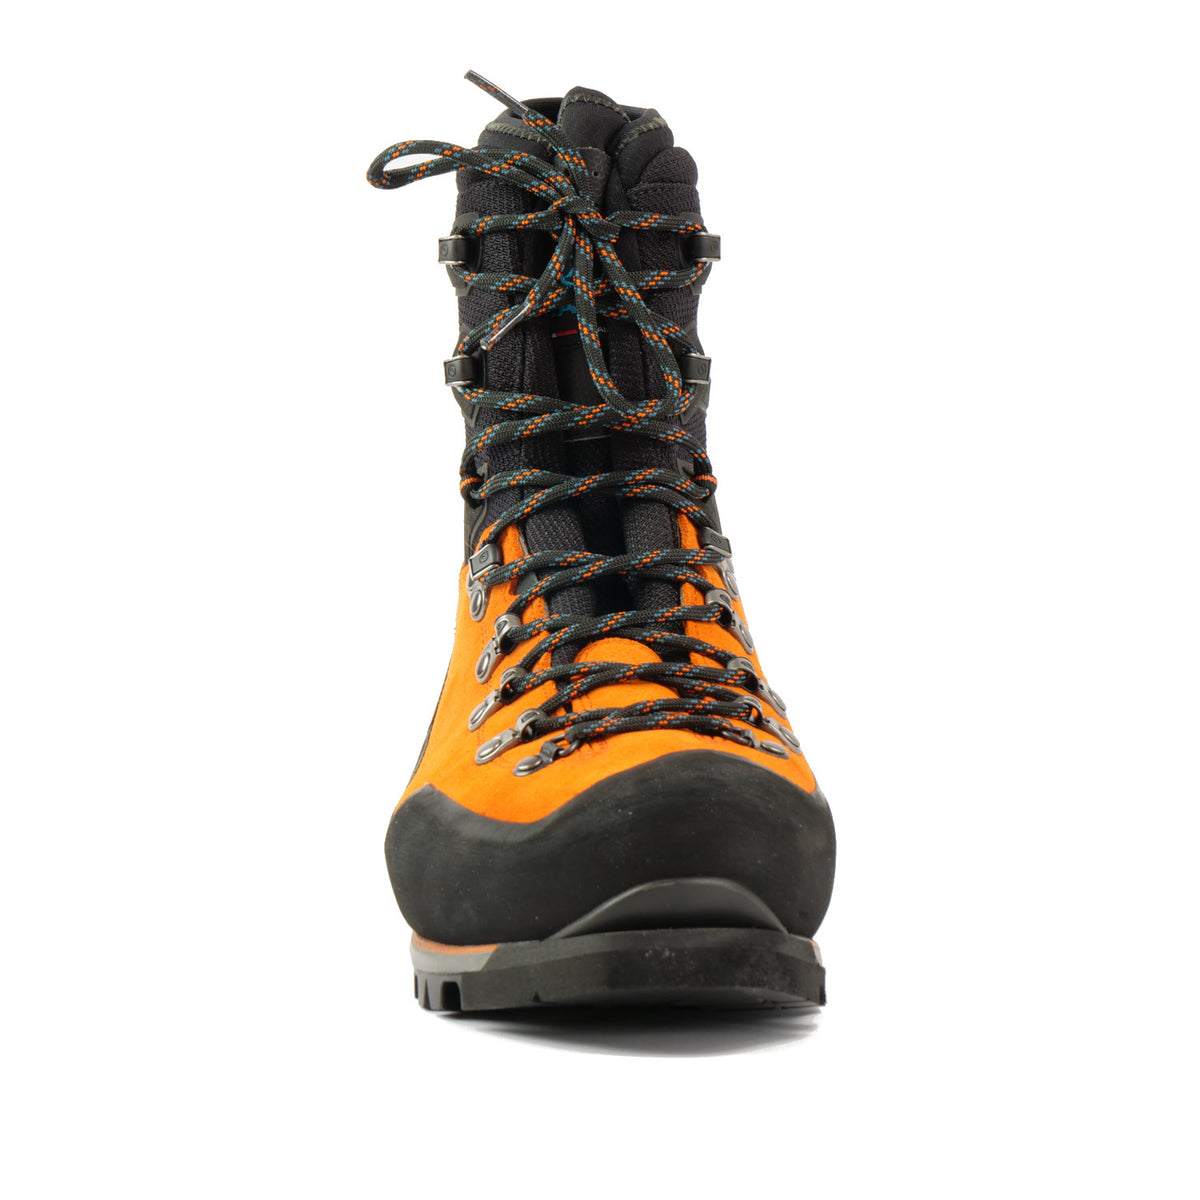 Front view a Scarpa Mont Blanc Pro GTX with orange Perwanger outer and black rubber and flexible sock and tongue